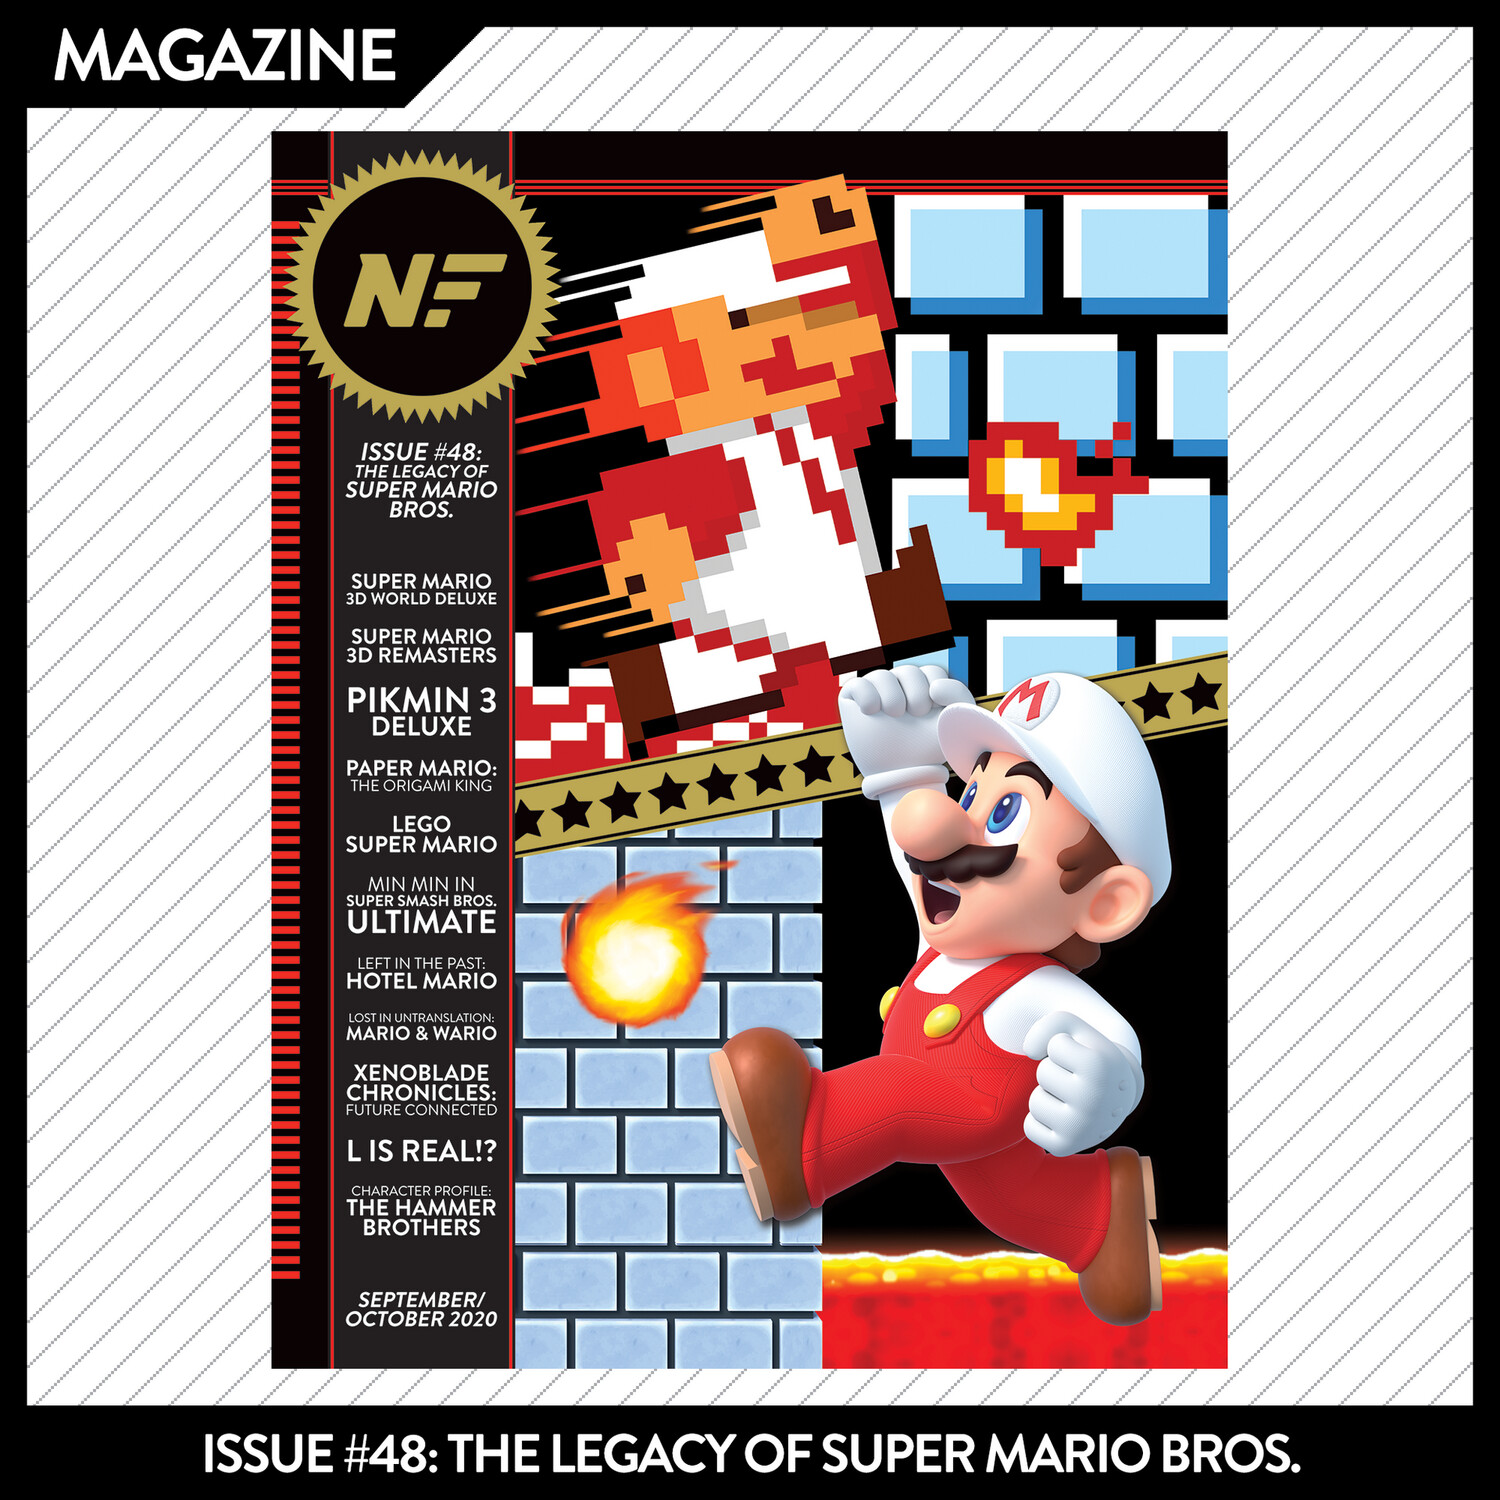 Issue #48: The Legacy of Super Mario Bros. – September/October 2020